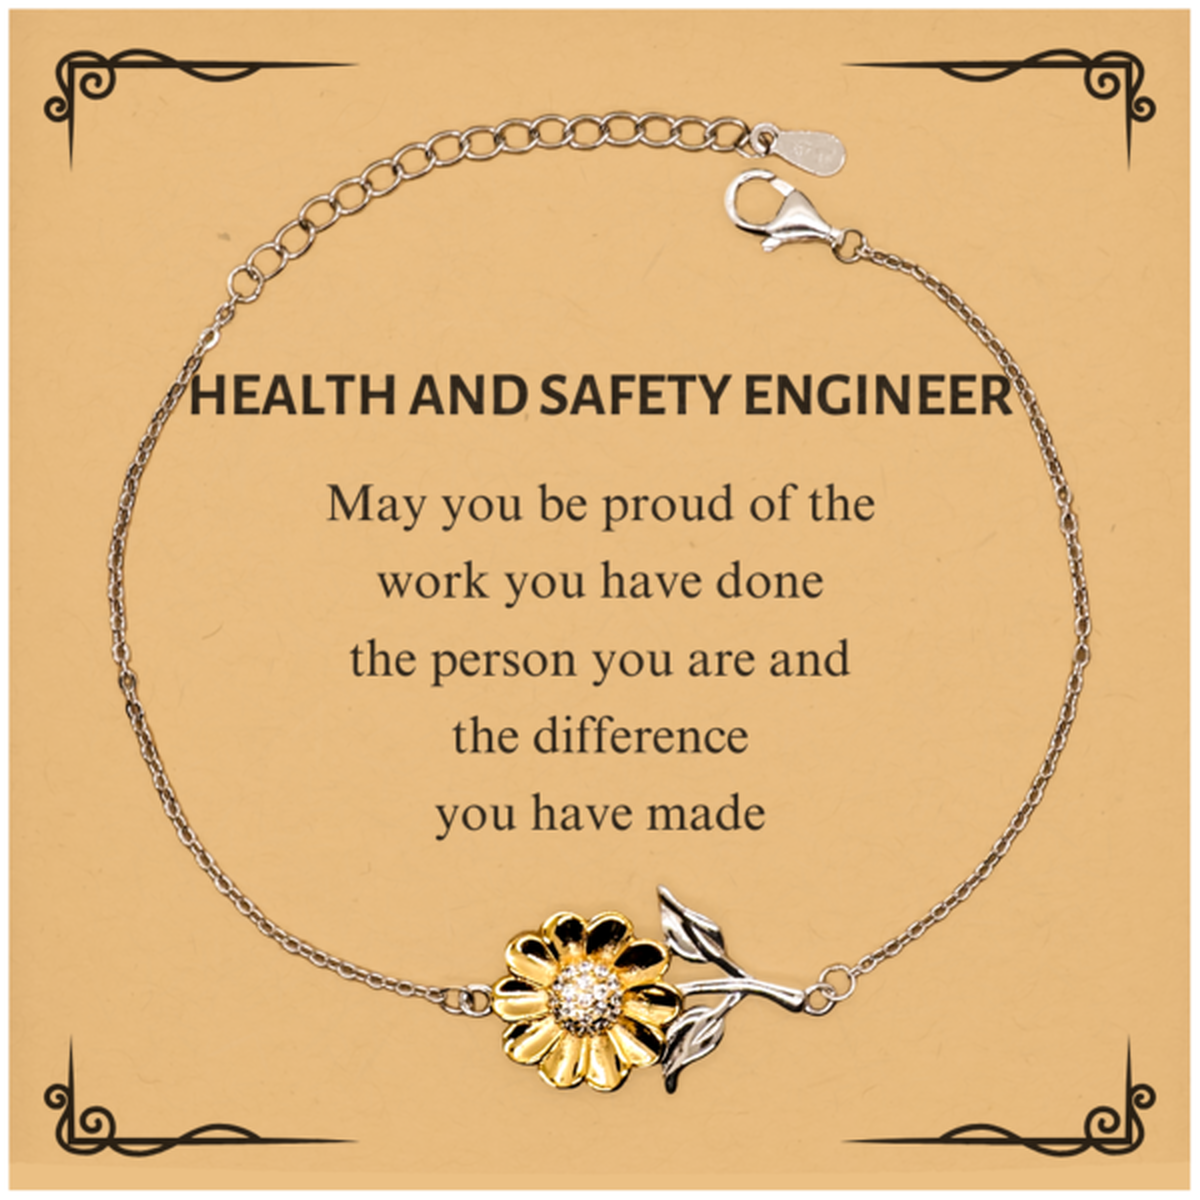 Health and Safety Engineer May you be proud of the work you have done, Retirement Health and Safety Engineer Sunflower Bracelet for Colleague Appreciation Gifts Amazing for Health and Safety Engineer